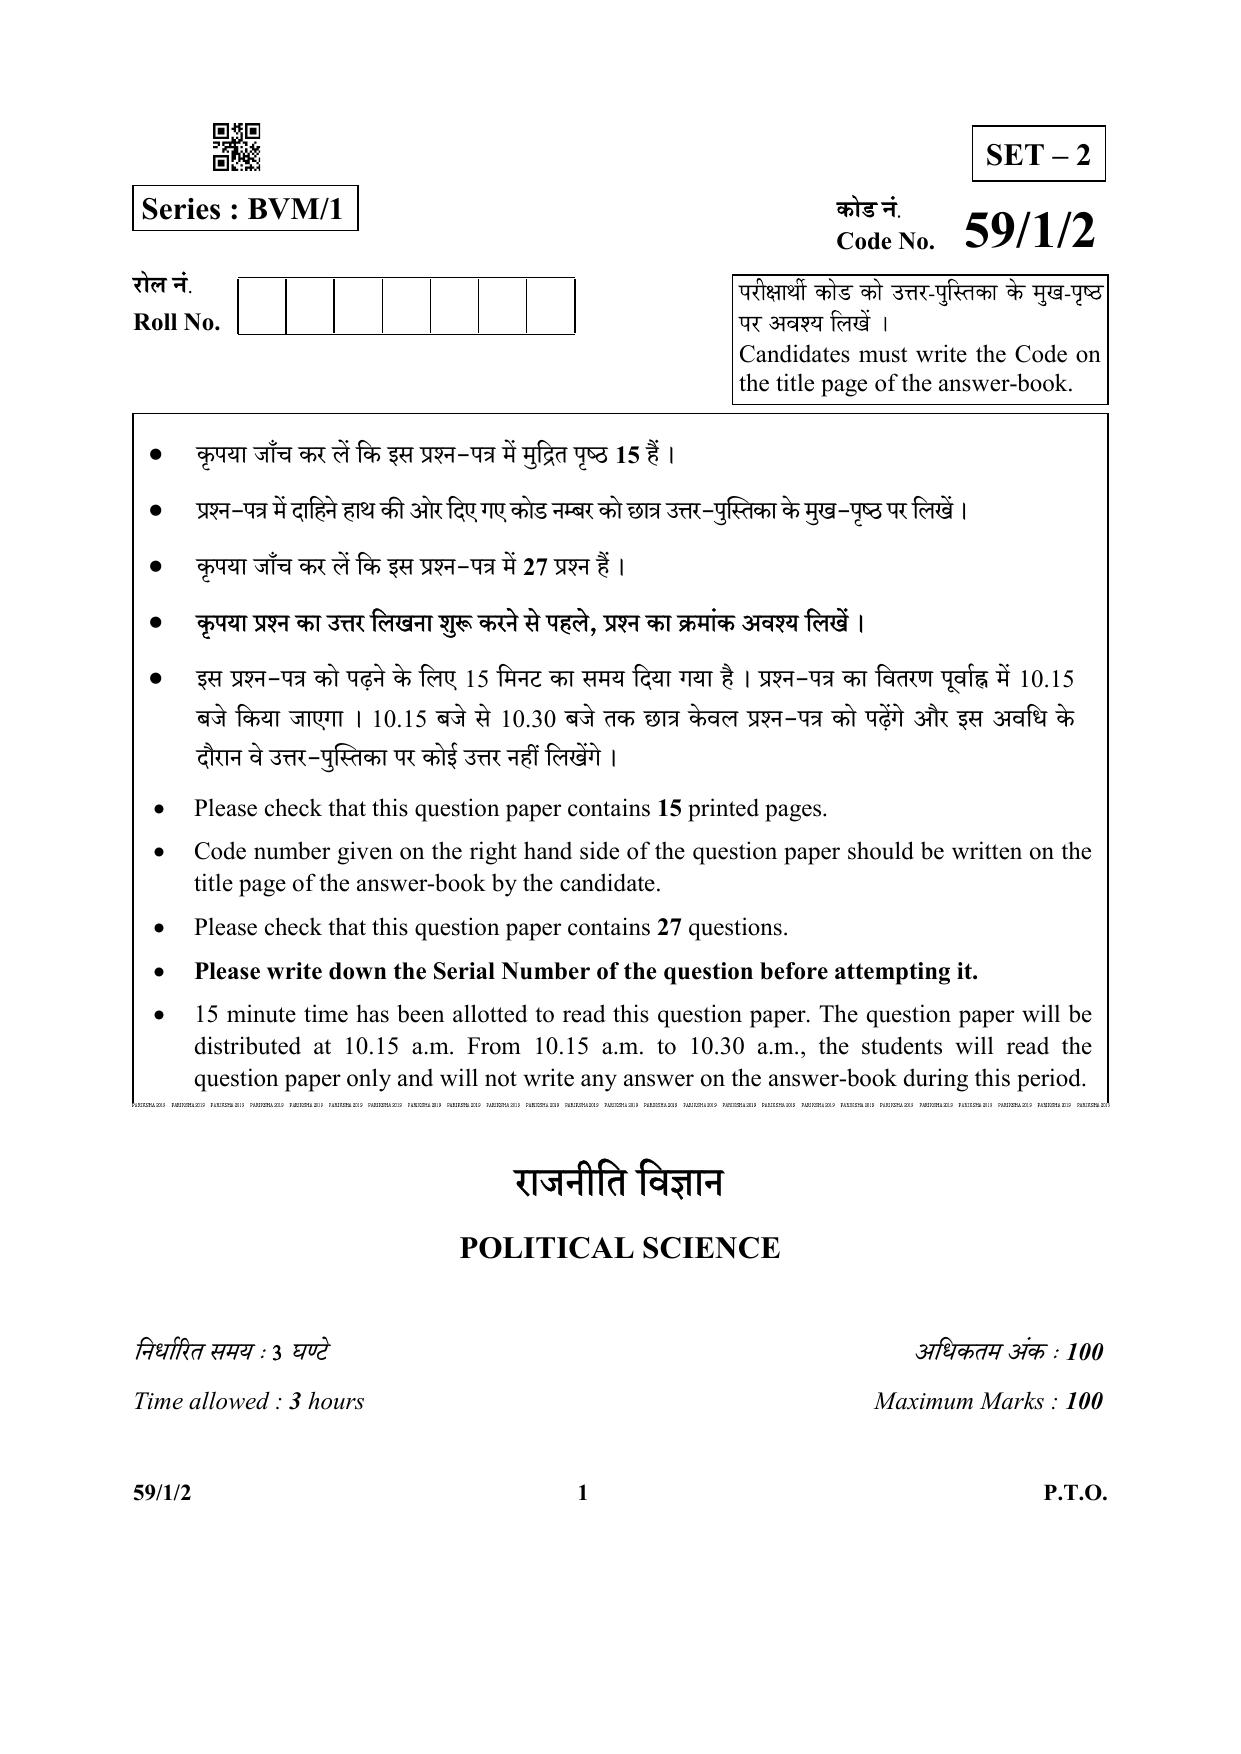 CBSE Class 12 59-1-2 (Political Science) 2019 Question Paper - Page 1